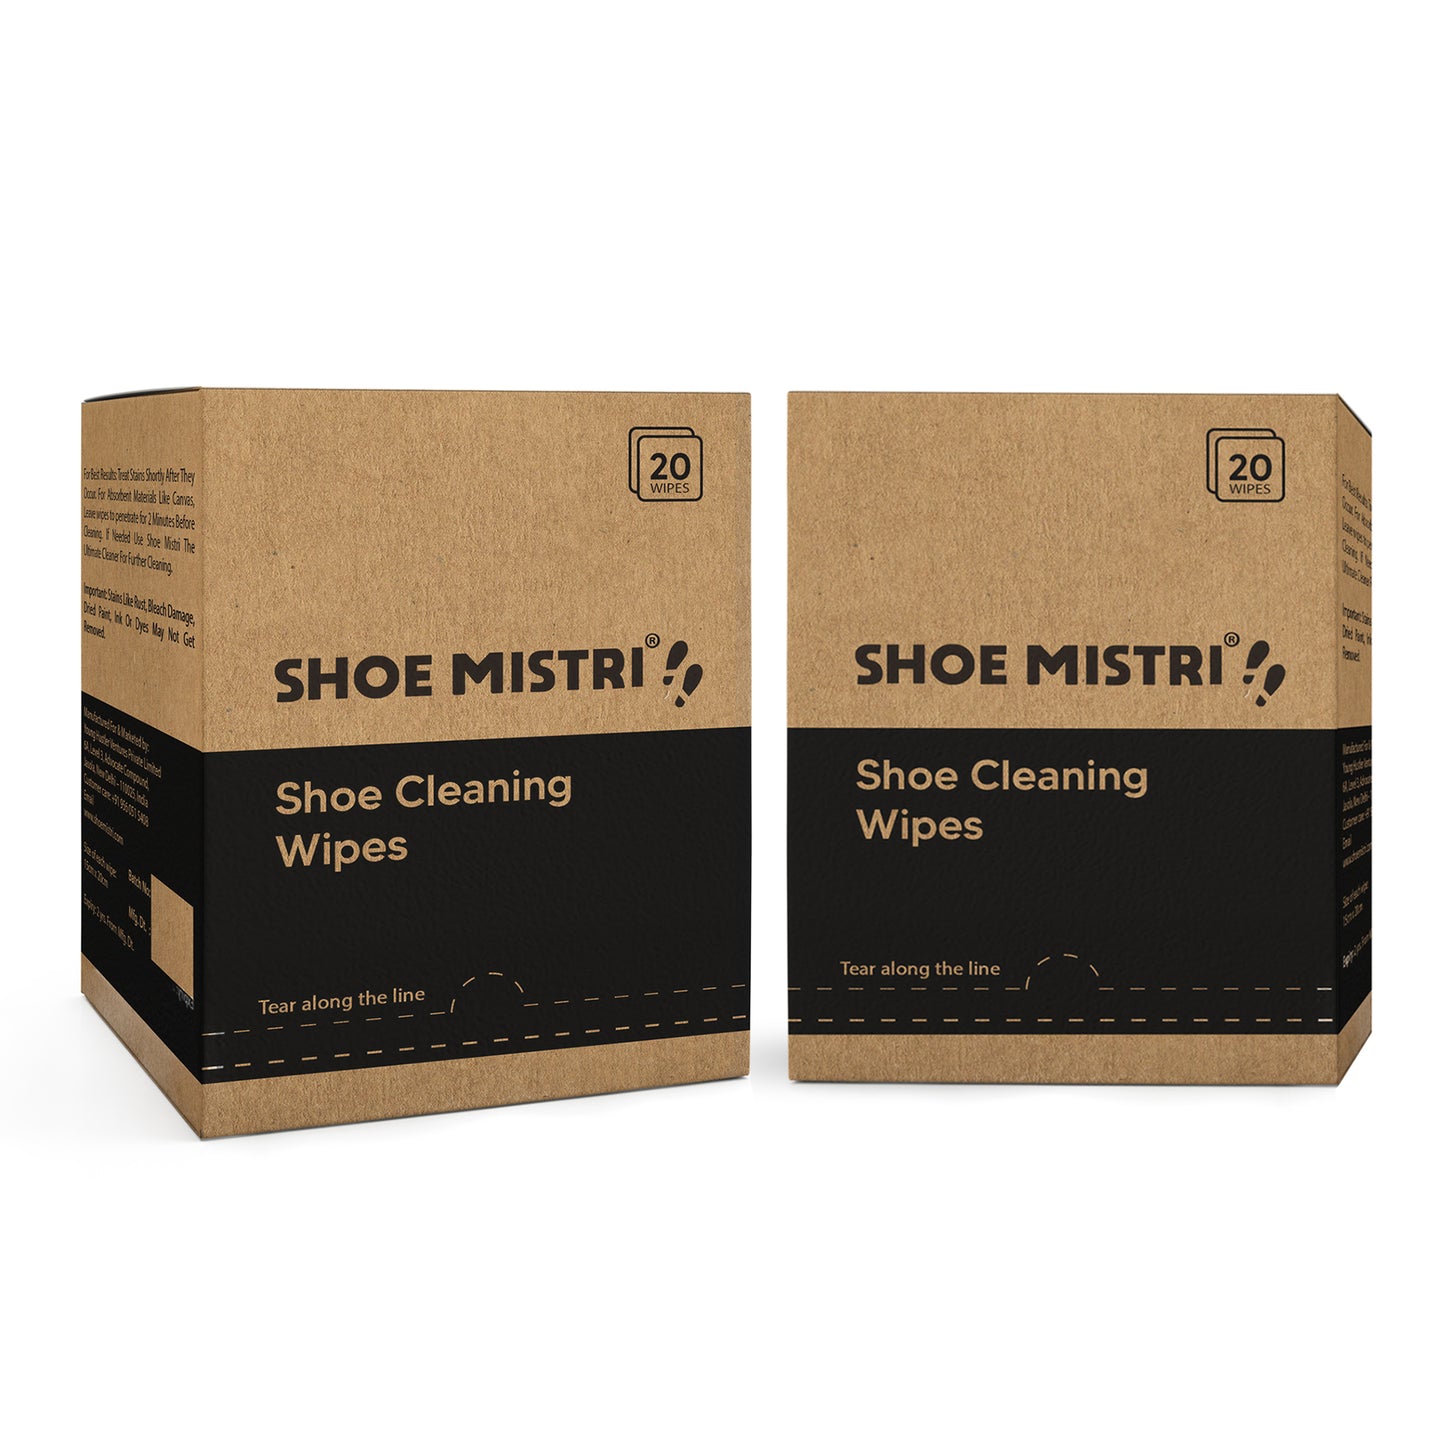 Shoe Mistri Instant Shoe Cleaning Wipes | Shoe Wipes For Quickly Remove Dirt & Stains| Suitable To Use On Leather, Suede, Nubuck, Mesh, Knit, Nylon, PU, Canvas, & Absorbent and Non-Absorbent Material